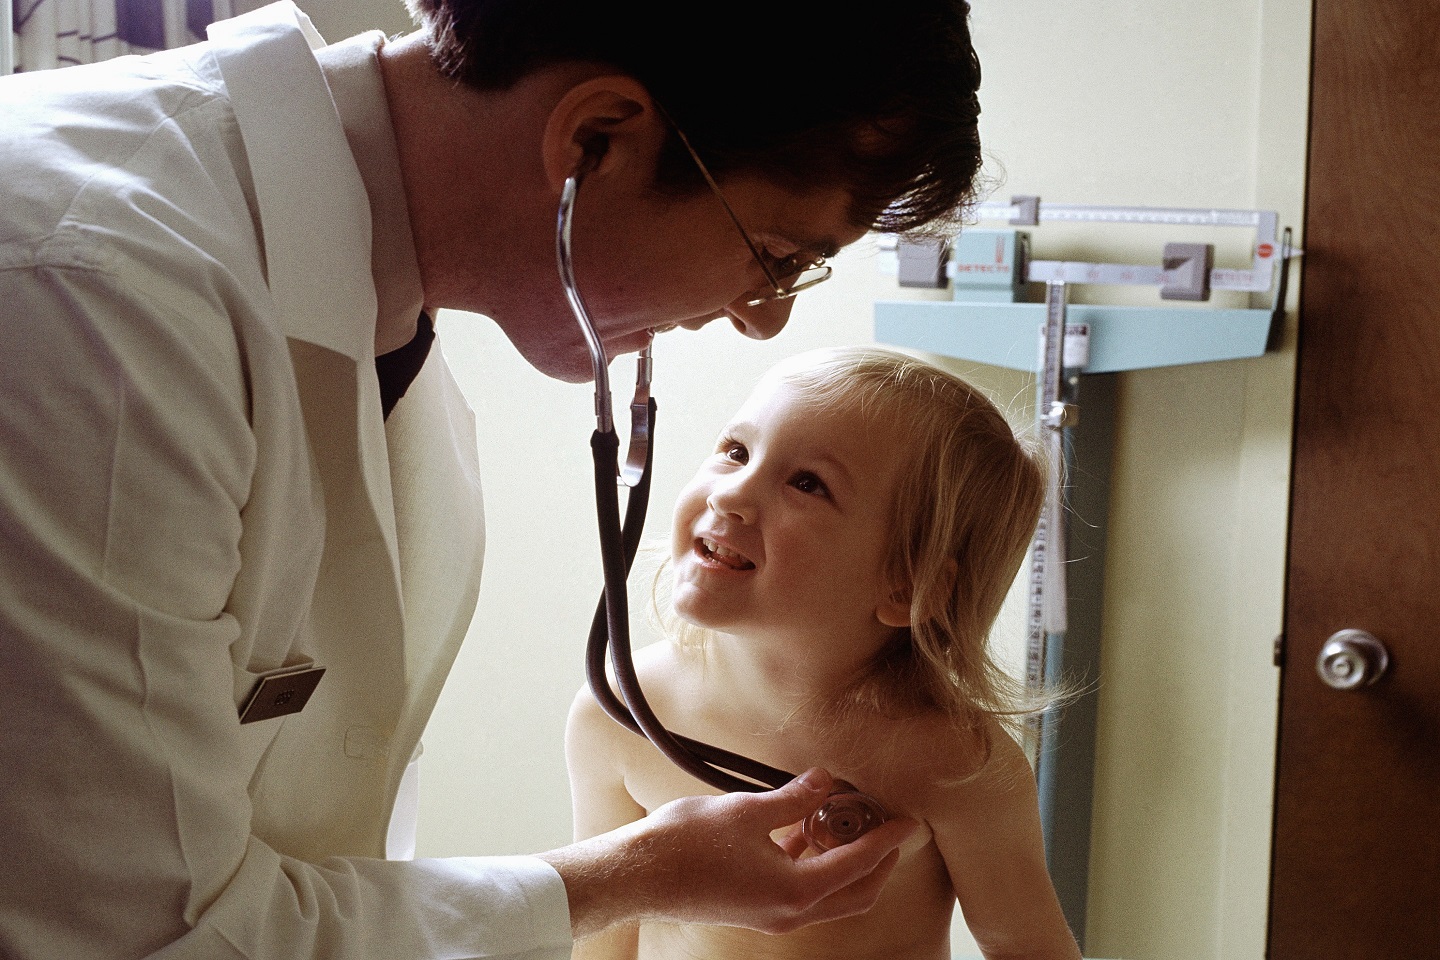 doctor_uses_a_stethoscope_to_examine_a_young_patient.jpeg